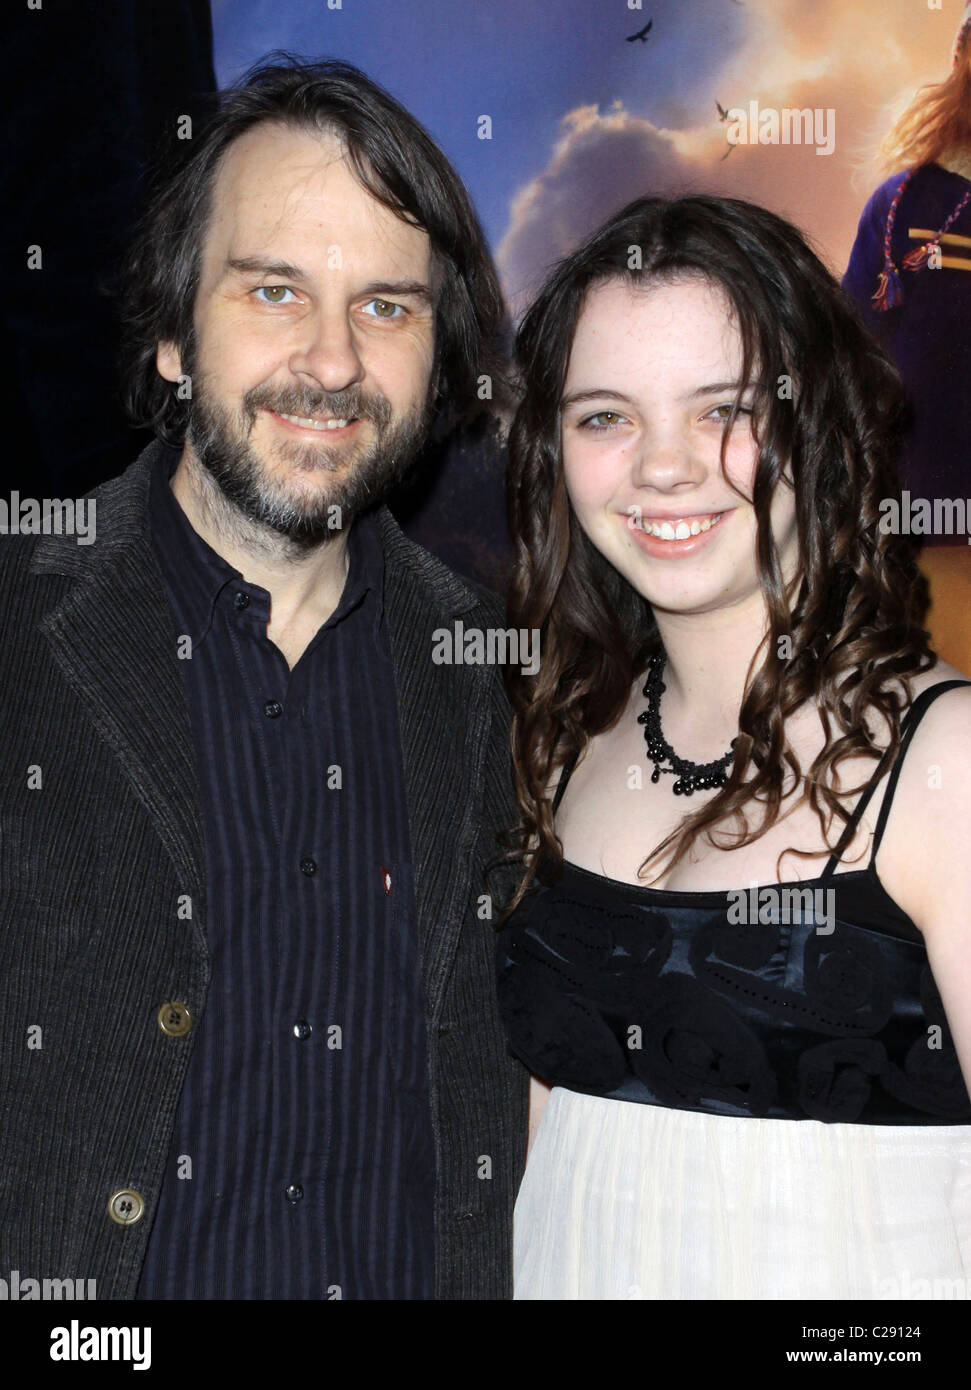 Peter Jackson and his daughter Katie Jackson The Hollywood premiere of 'The Lovely Bones' held at Grauman's Chinese Theatre - Stock Photo